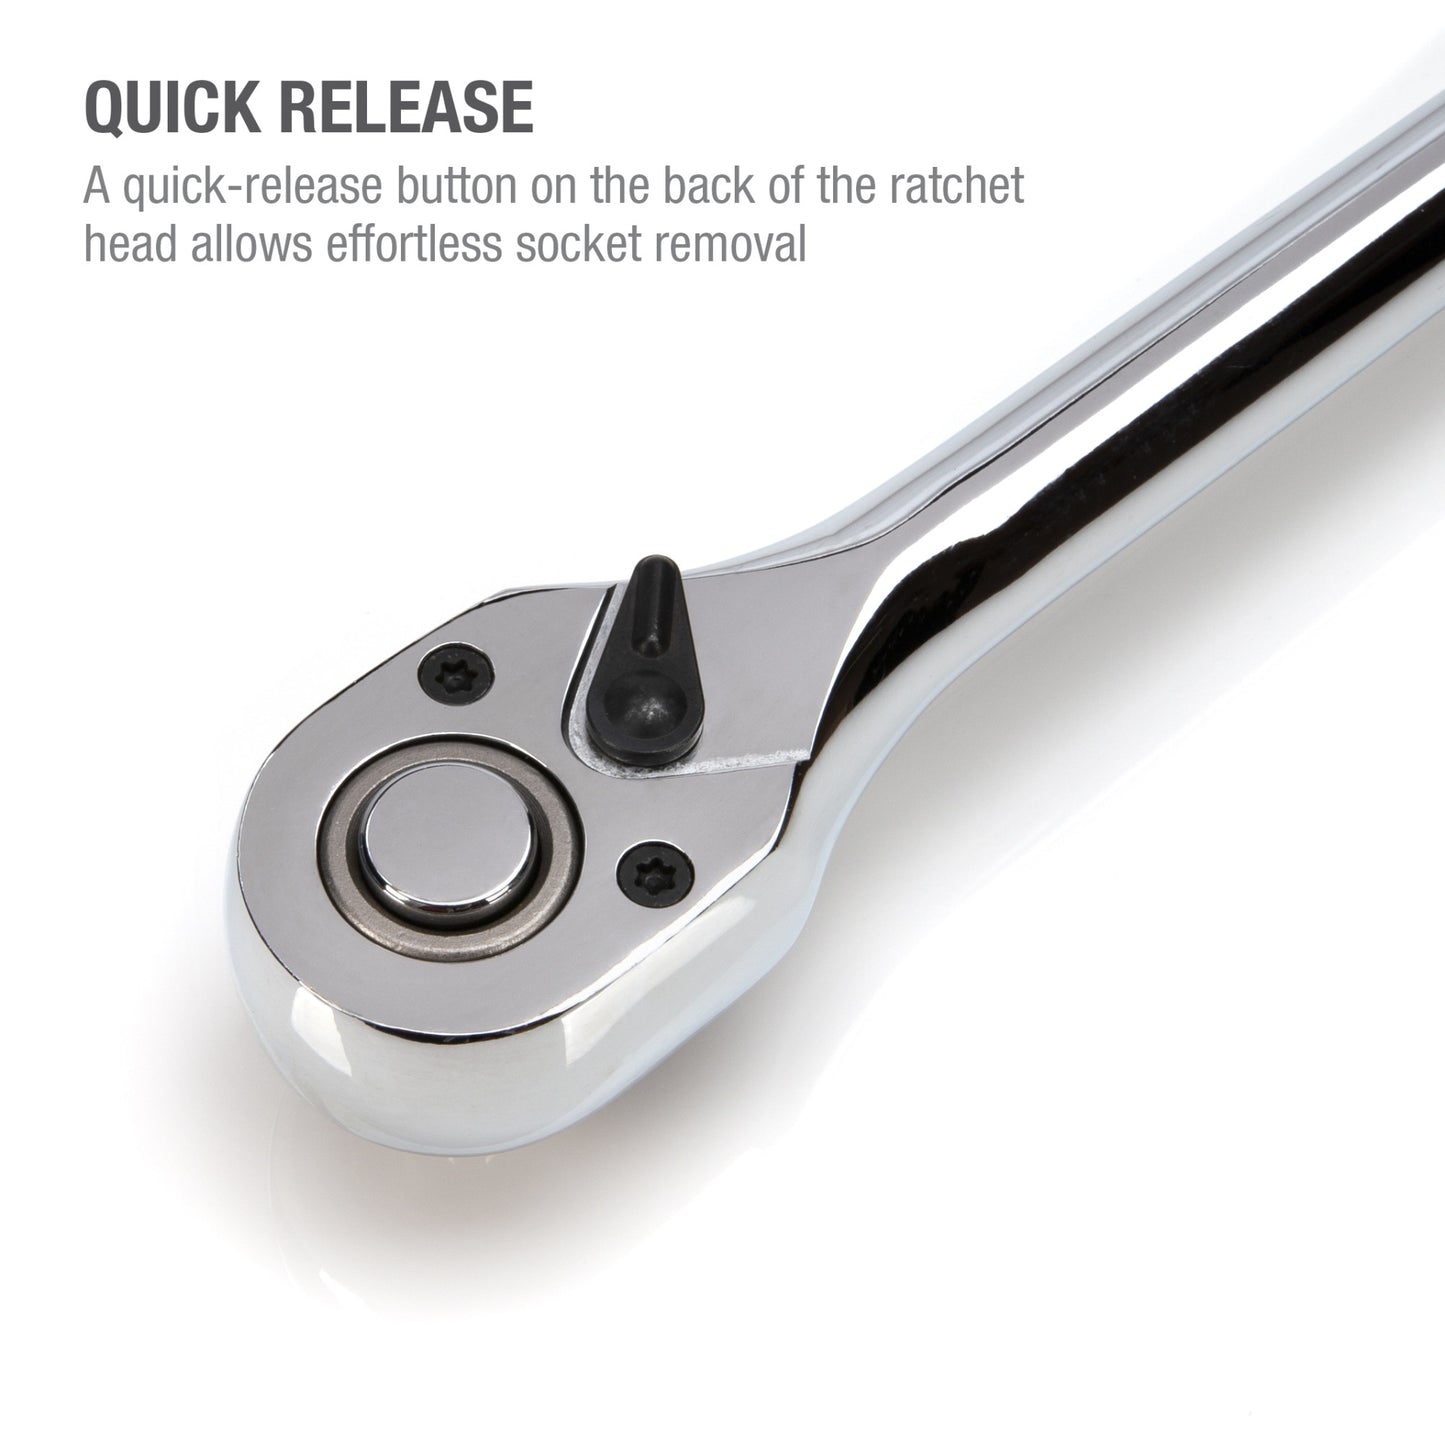 1/2-Inch Drive 72-Tooth Reversible Quick-Release Ratchet with 24-Inch Long Full Polish Handle